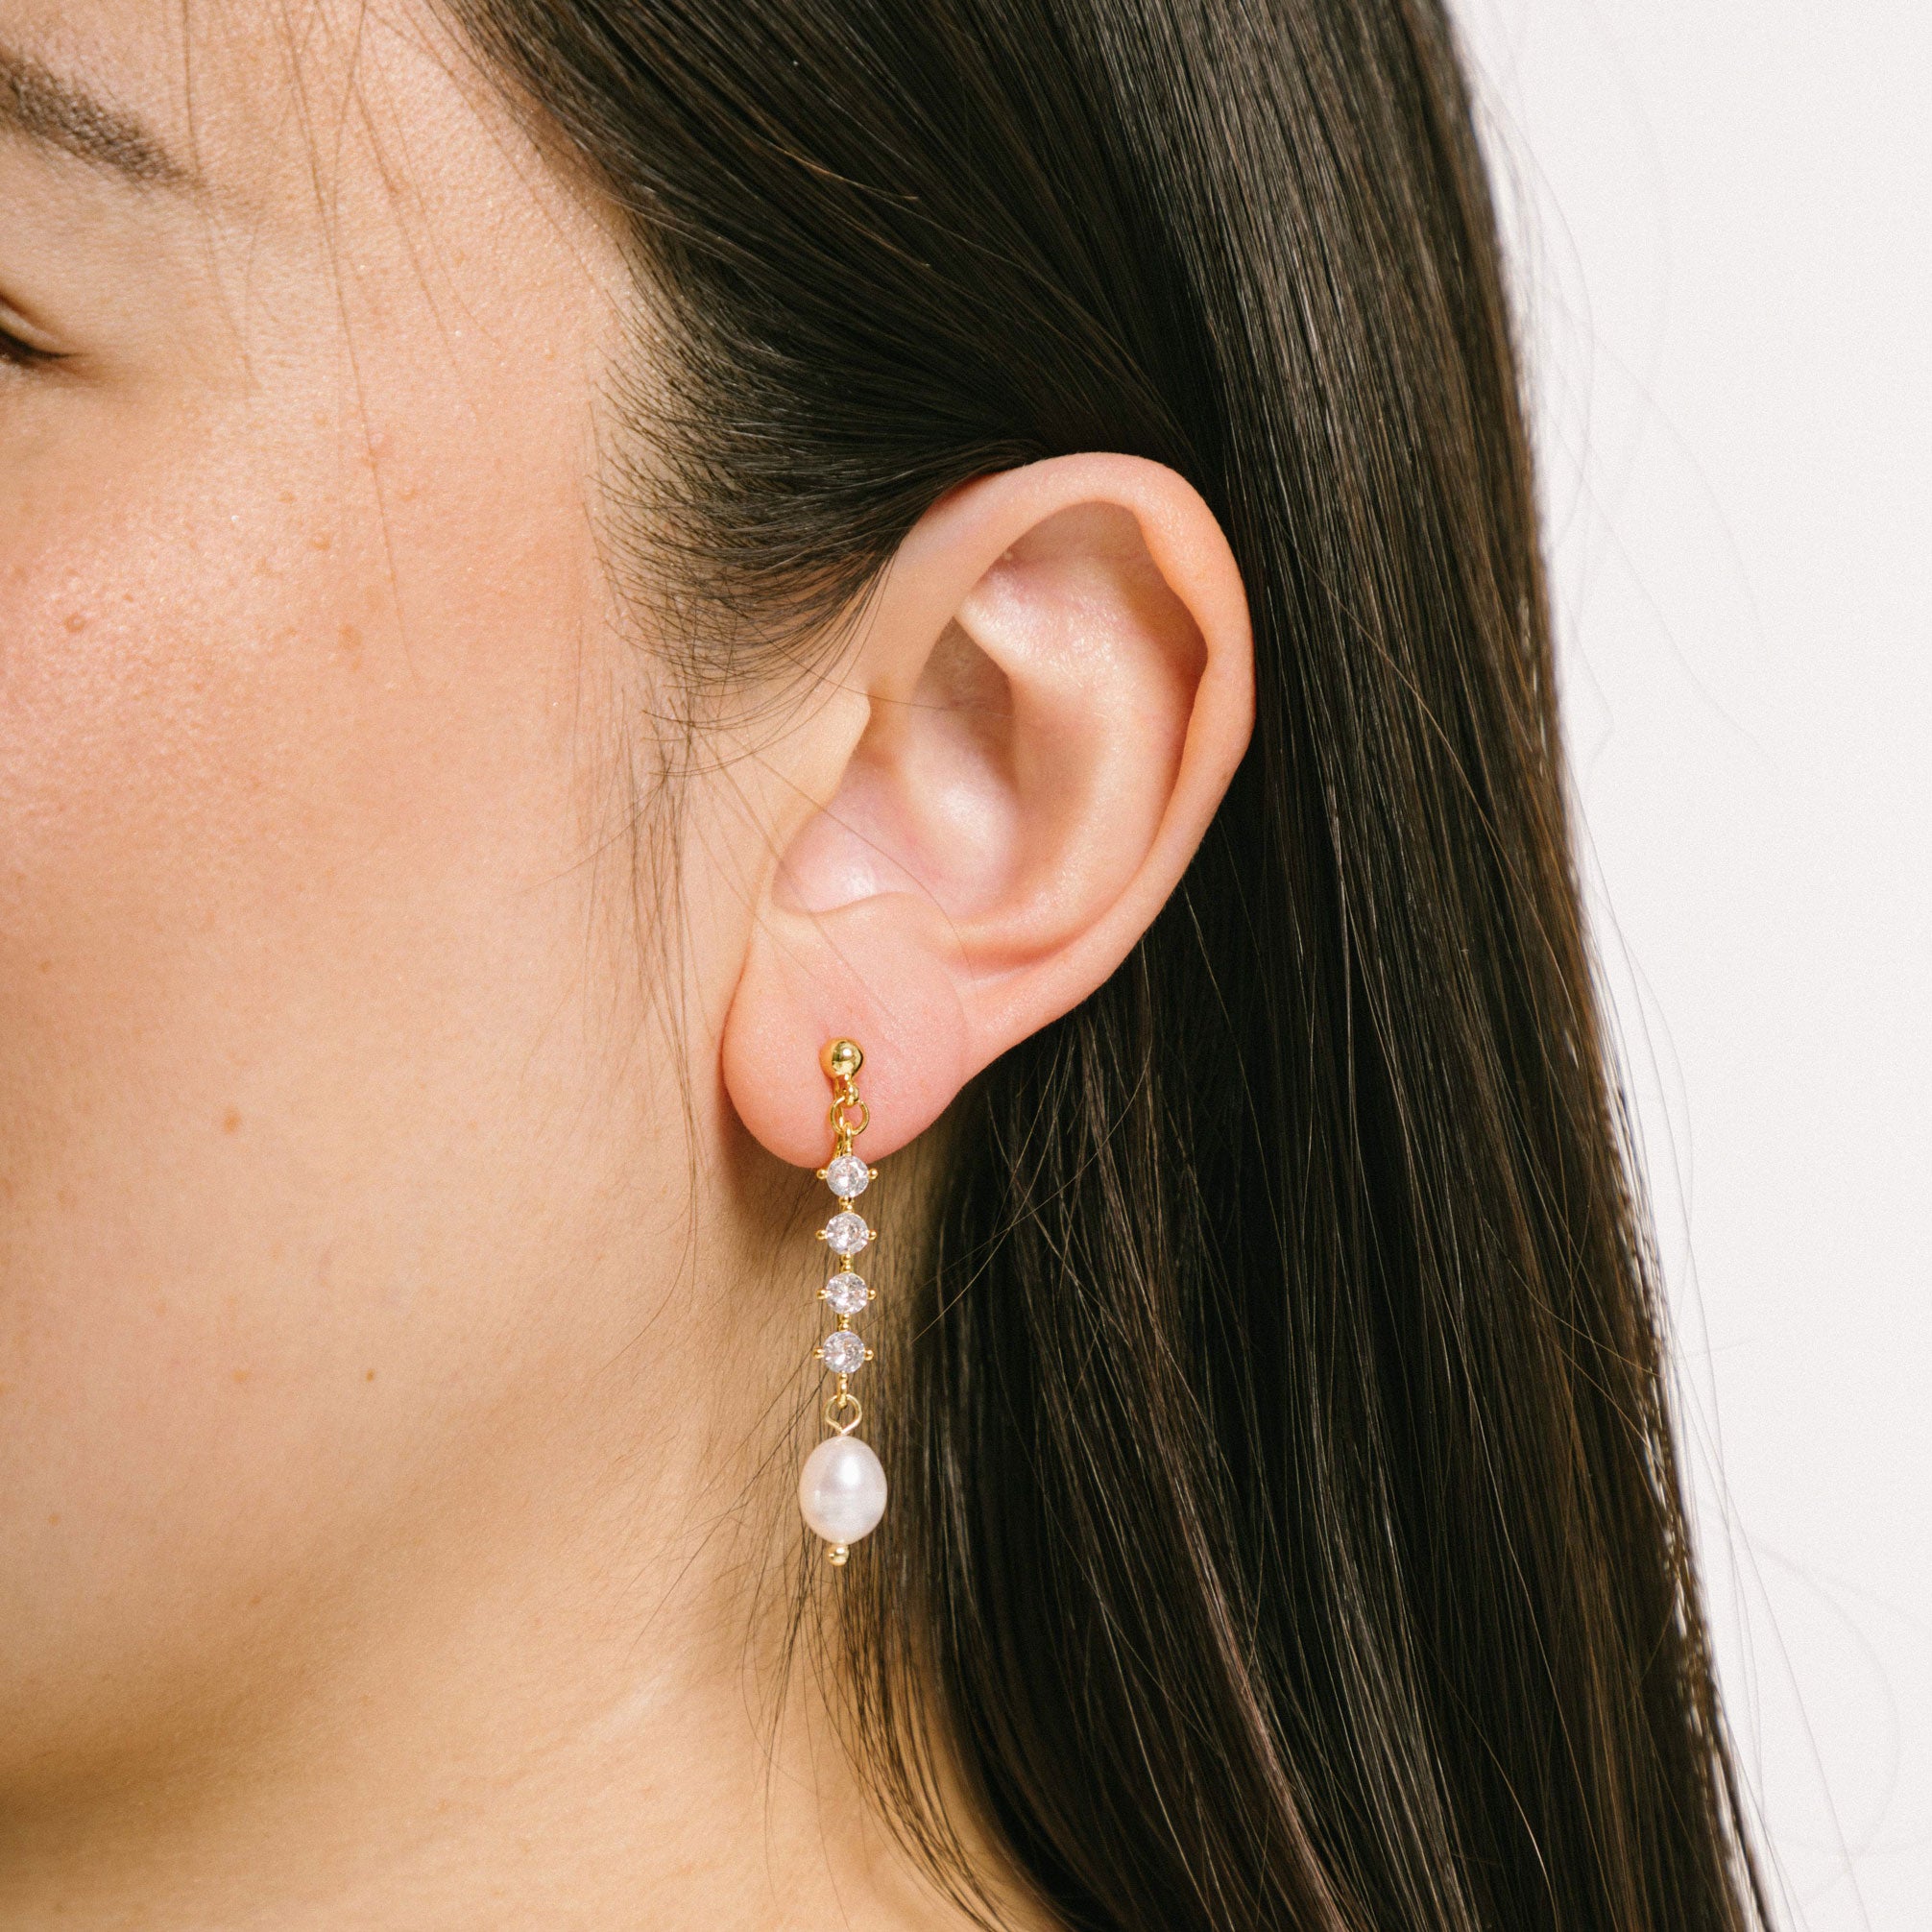 A model wearing the Sophia Clip On Earrings are designed for thick/large ears and sensitive ears alike. These earrings feature mosquito coil clip-on closures with a 24-hour average comfortable wear duration. Their medium secure hold can be adjusted gently by squeezing the padding forward once on the ear. Crafted with 14K gold plating, simulated faux pearl, and cubic zirconia, these earrings are lead/nickel/cadmium free and sold in single pairs.